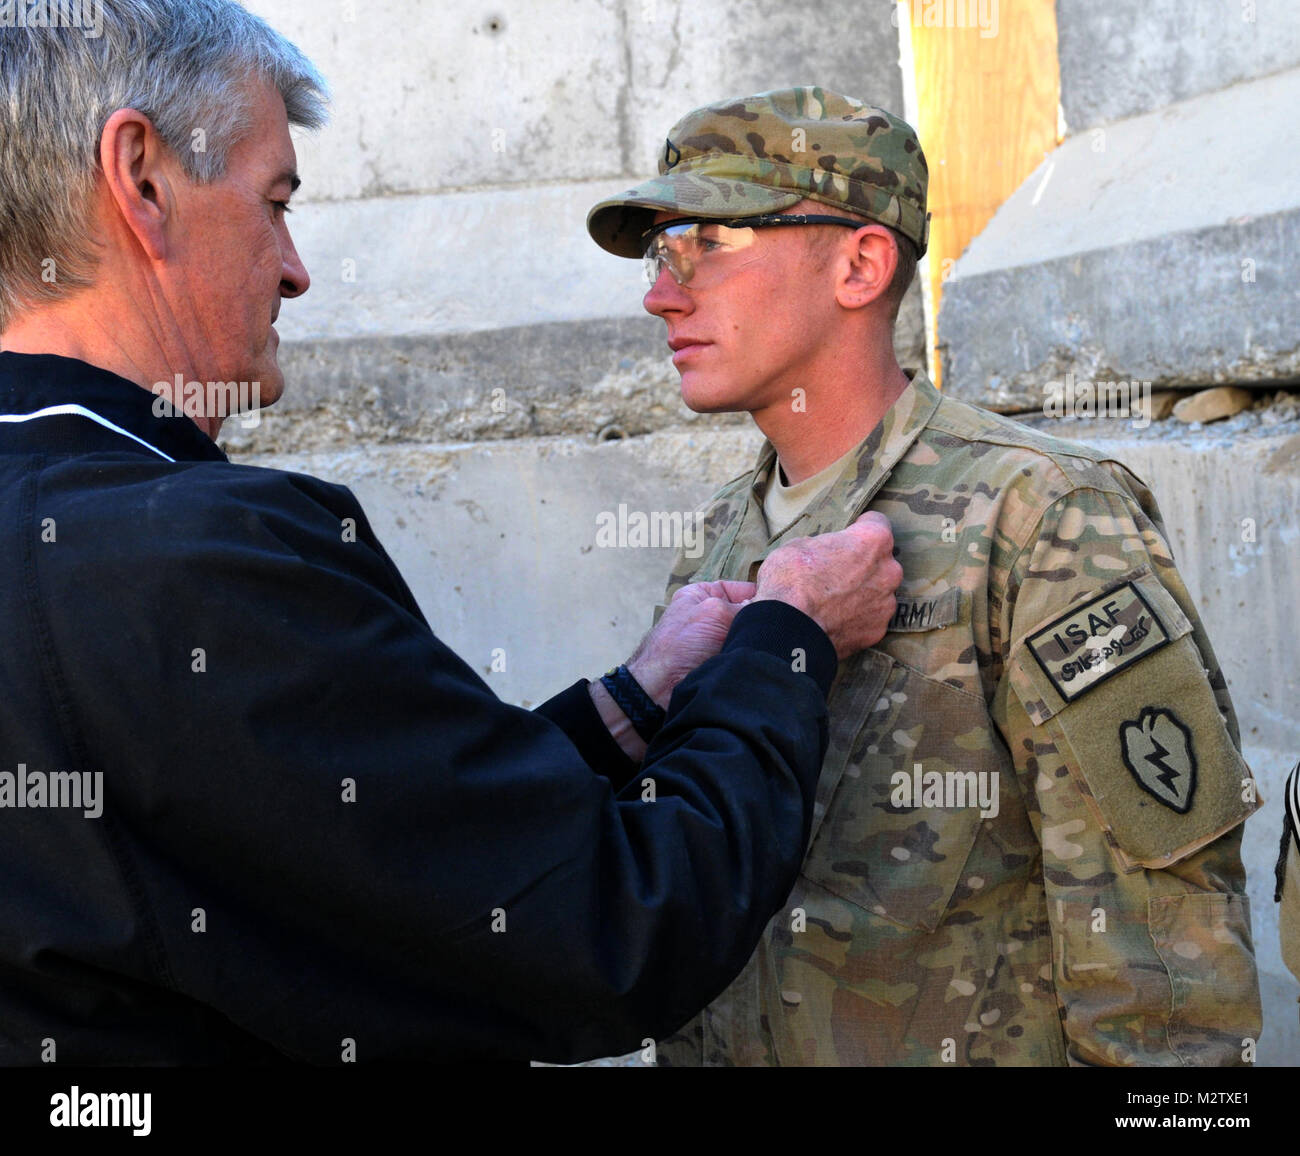 Secretary of the Army John M. McHugh presents the Purple Heart to Pfc. Steven Gagnon, an infantryman with 1st Battalion, 5th Infantry Regiment, 1st Stryker Brigade Combat Team, 25th Infantry Division, originally from Porter, Maine, in a ceremony at Forward Operating Base Masum Ghar on Dec. 14. US Army photo by Sgt. Michael Blalack, 1/25 SBCT Public Affairs 111214-A-AX238-007 by 1 Stryker Brigade Combat Team Arctic Wolves Stock Photo